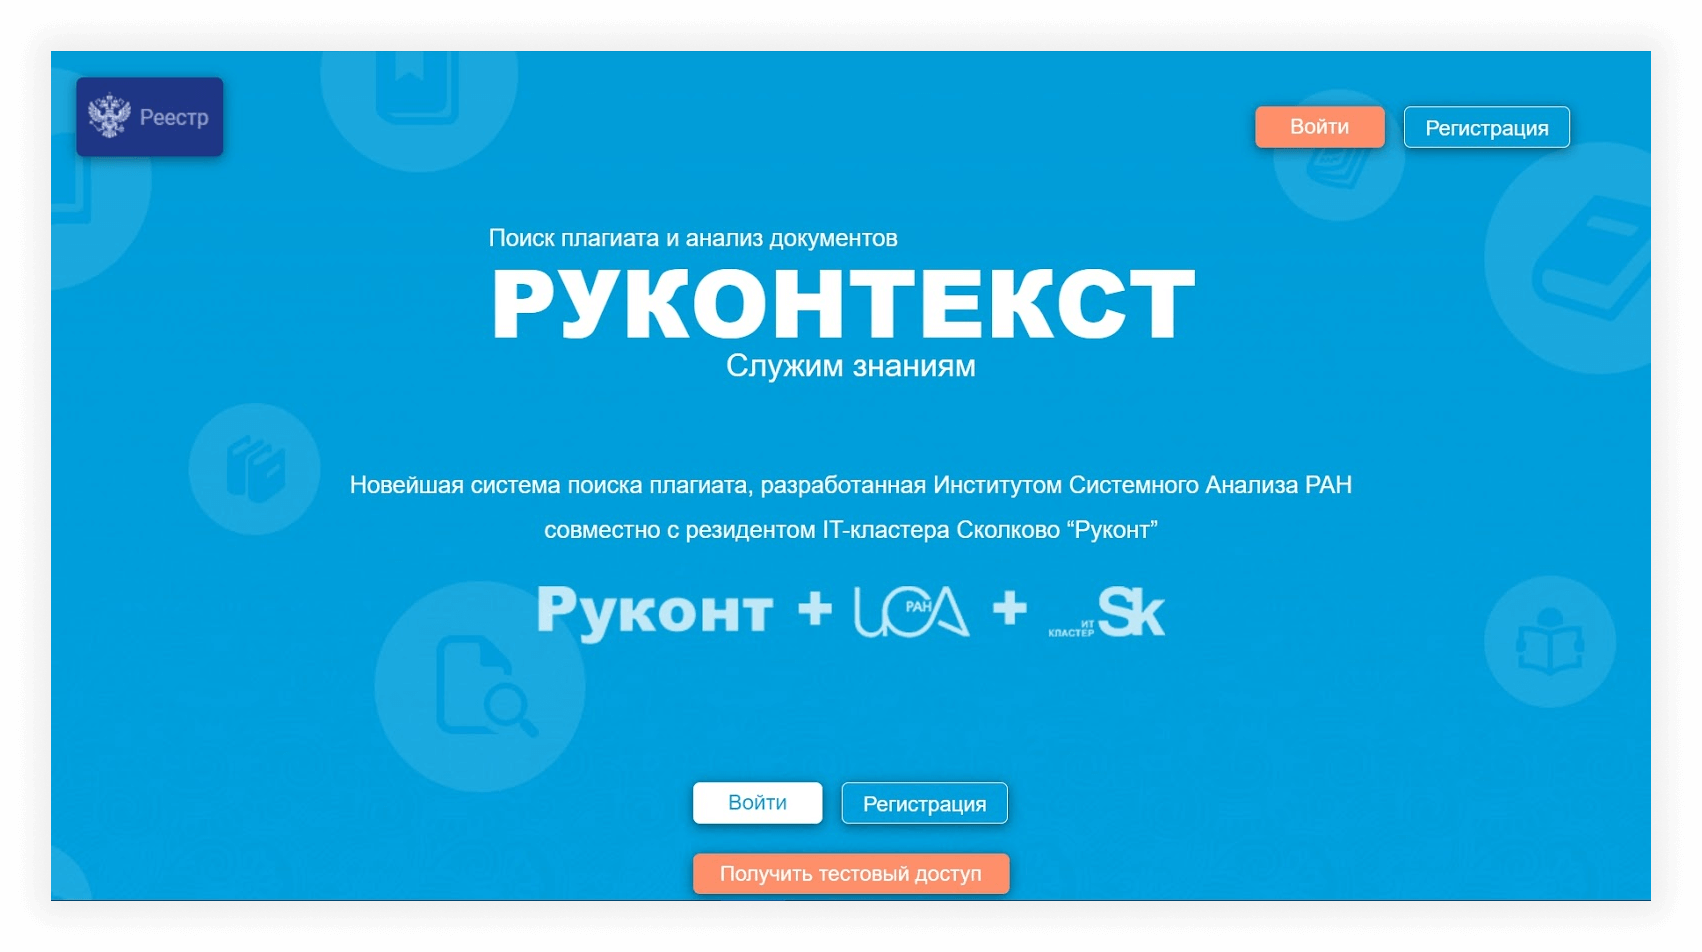 Руконтекст